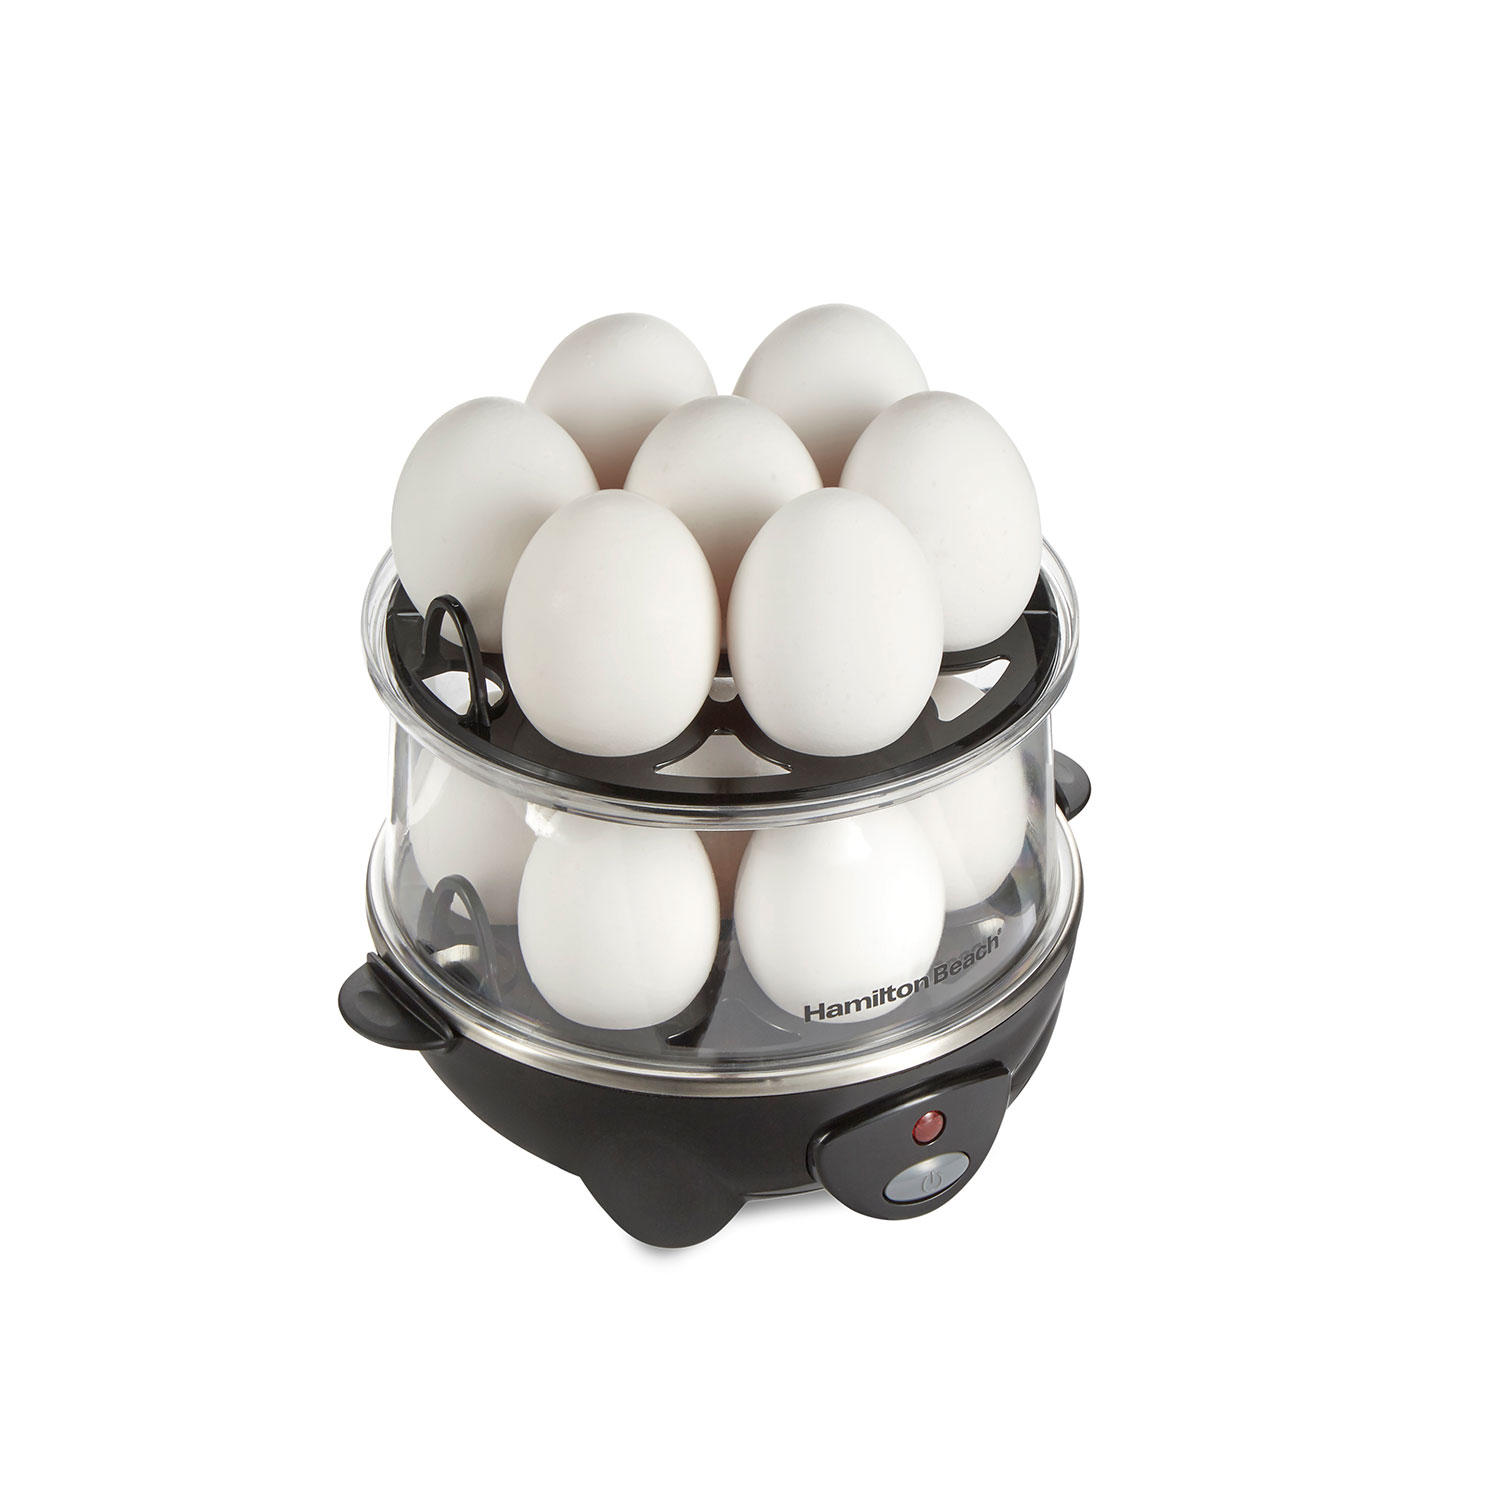 3-in-1 Egg Cooker with 14 Egg Capacity (25508G)